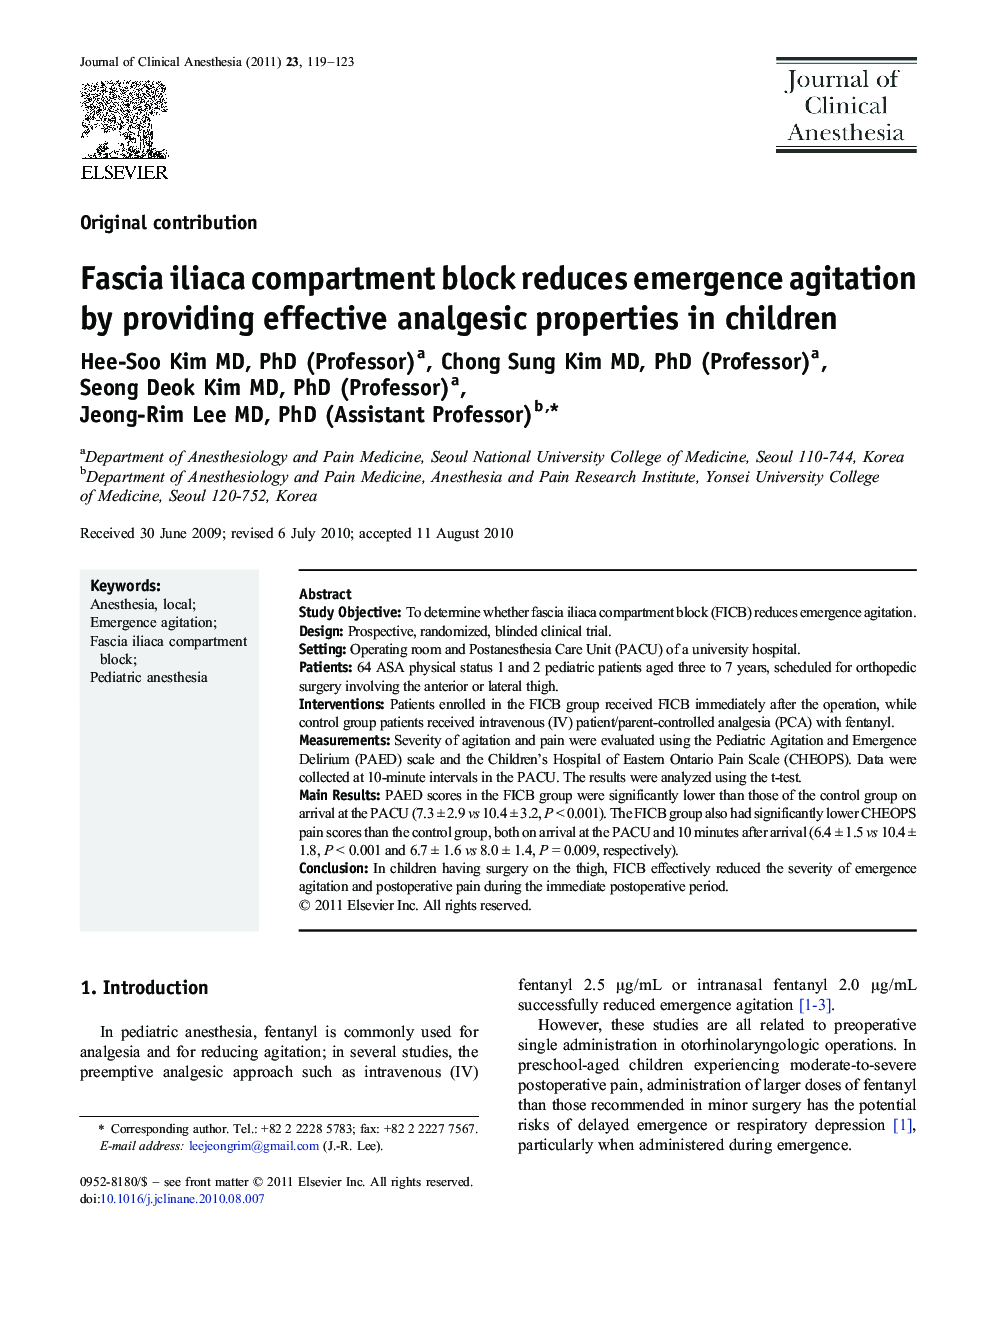 Fascia iliaca compartment block reduces emergence agitation by providing effective analgesic properties in children